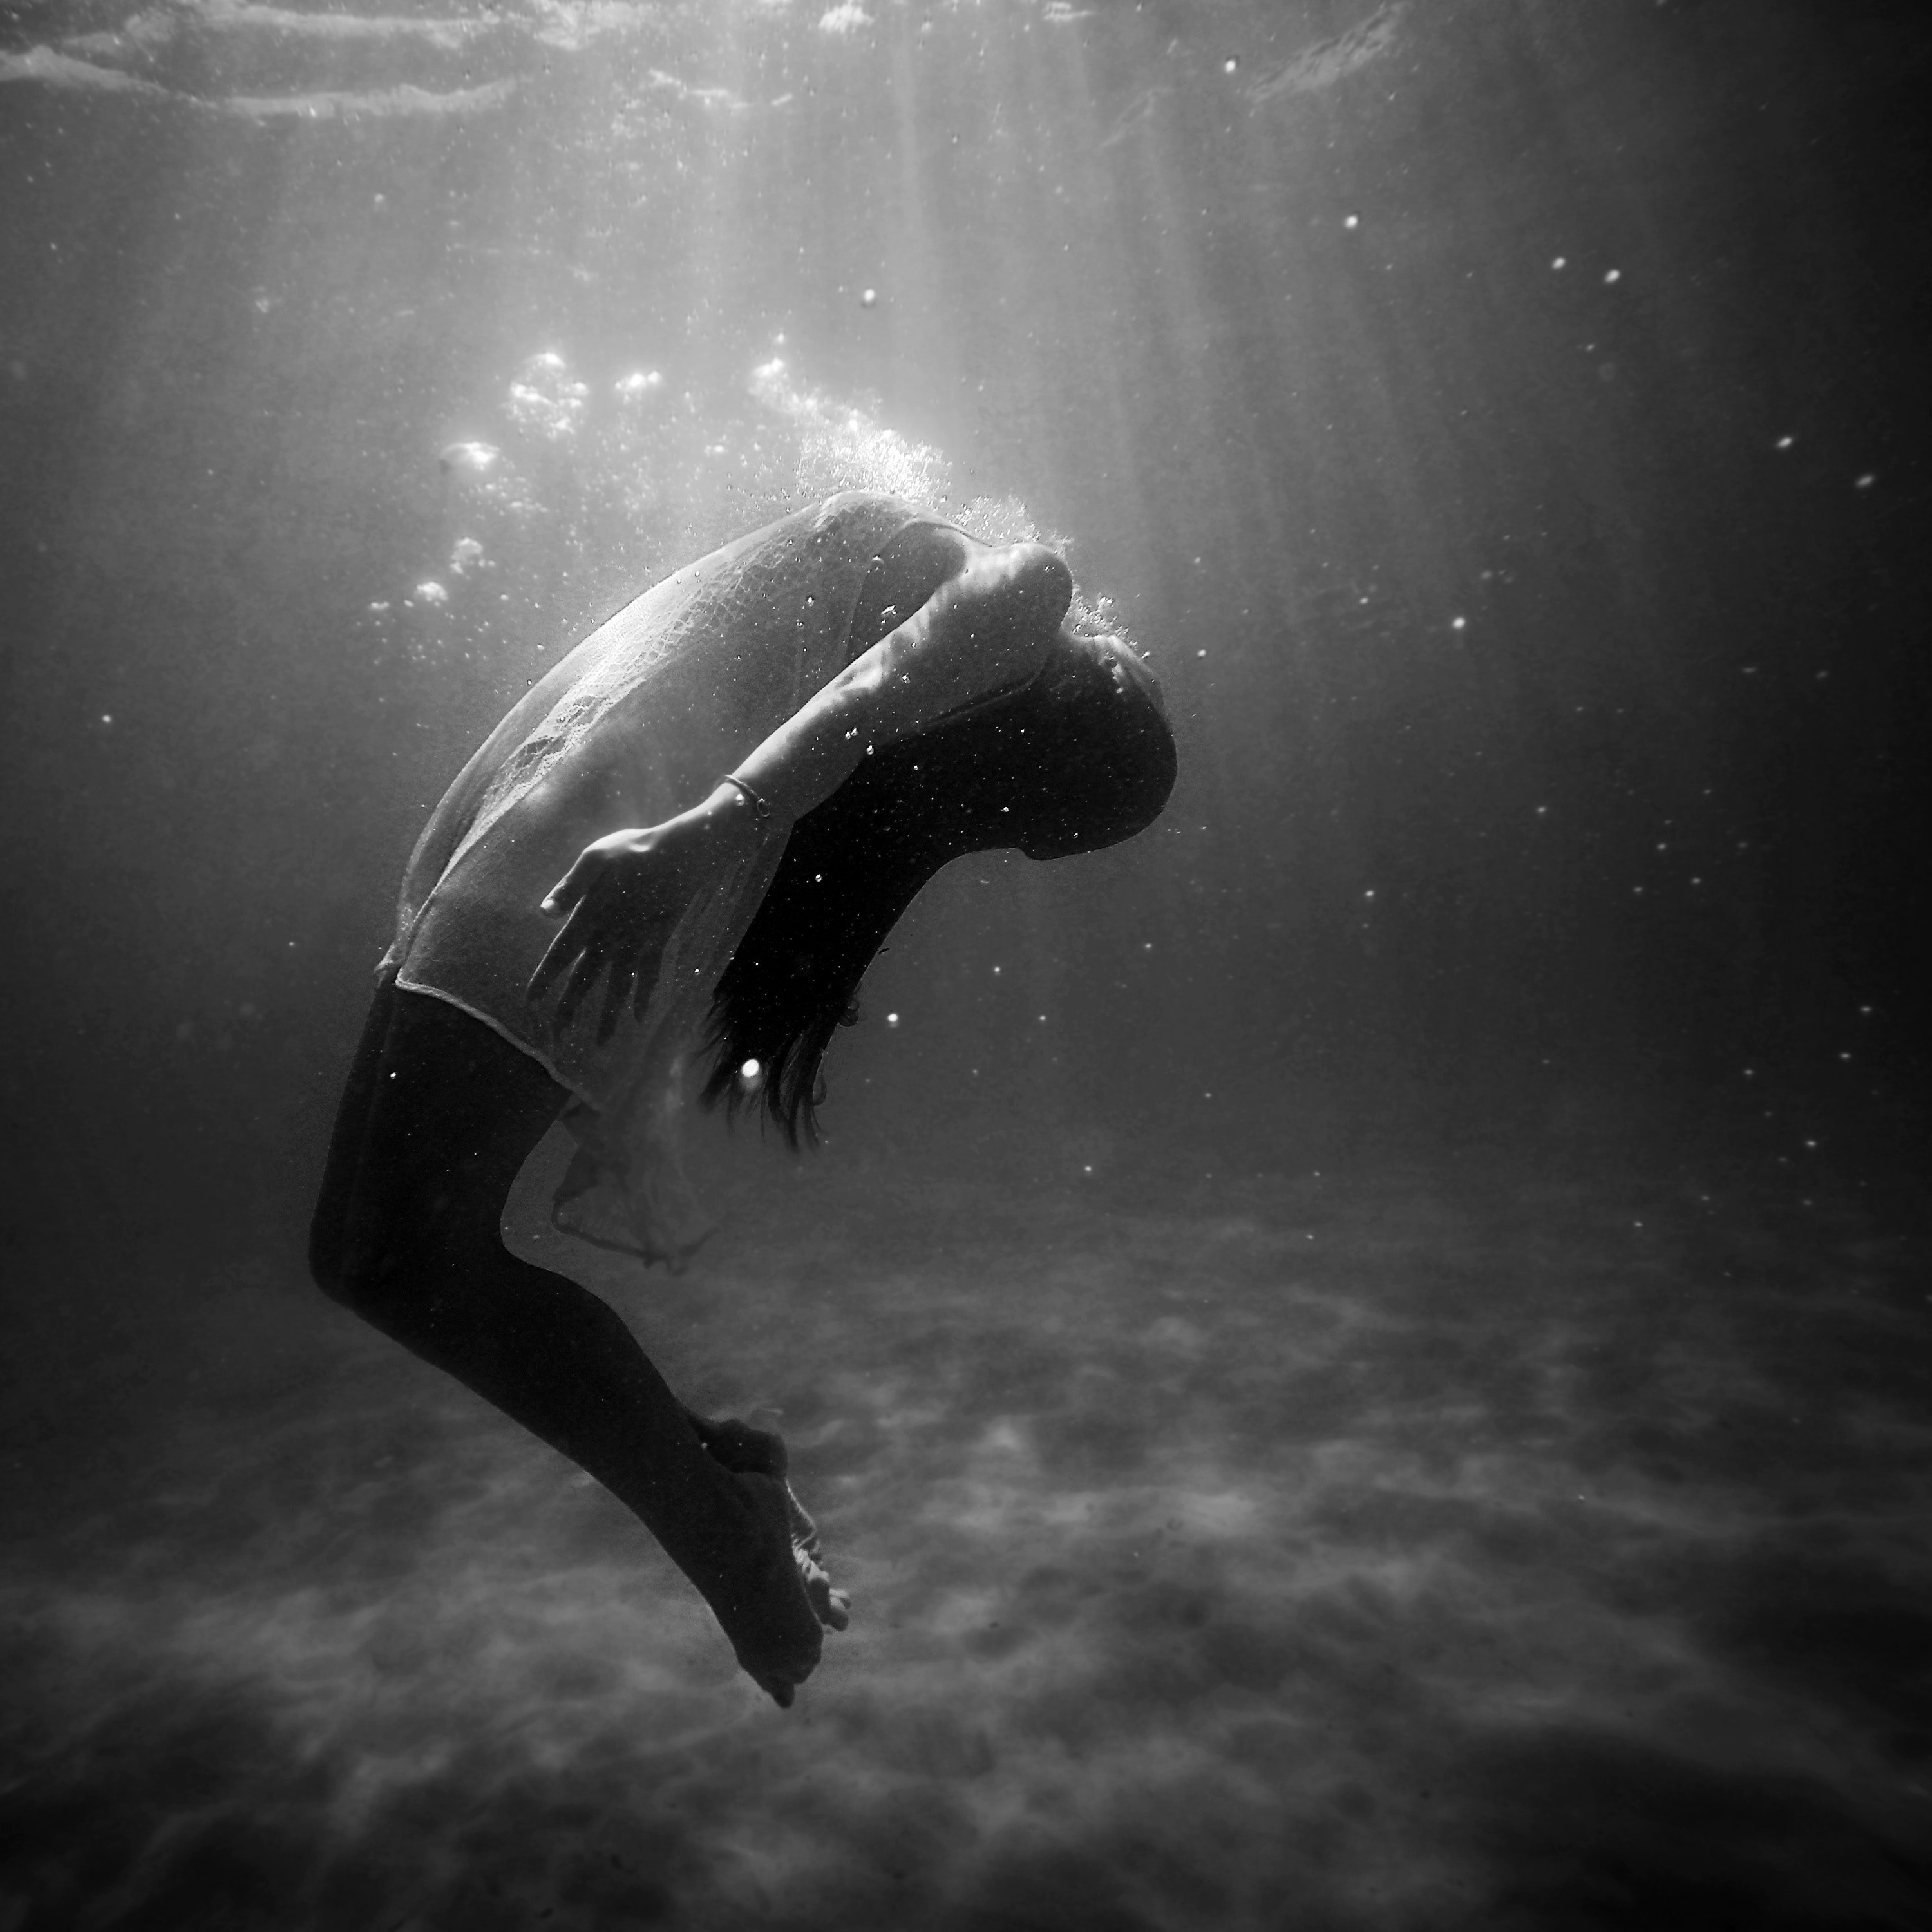 grief is like drowning in a whirlwind of emotions